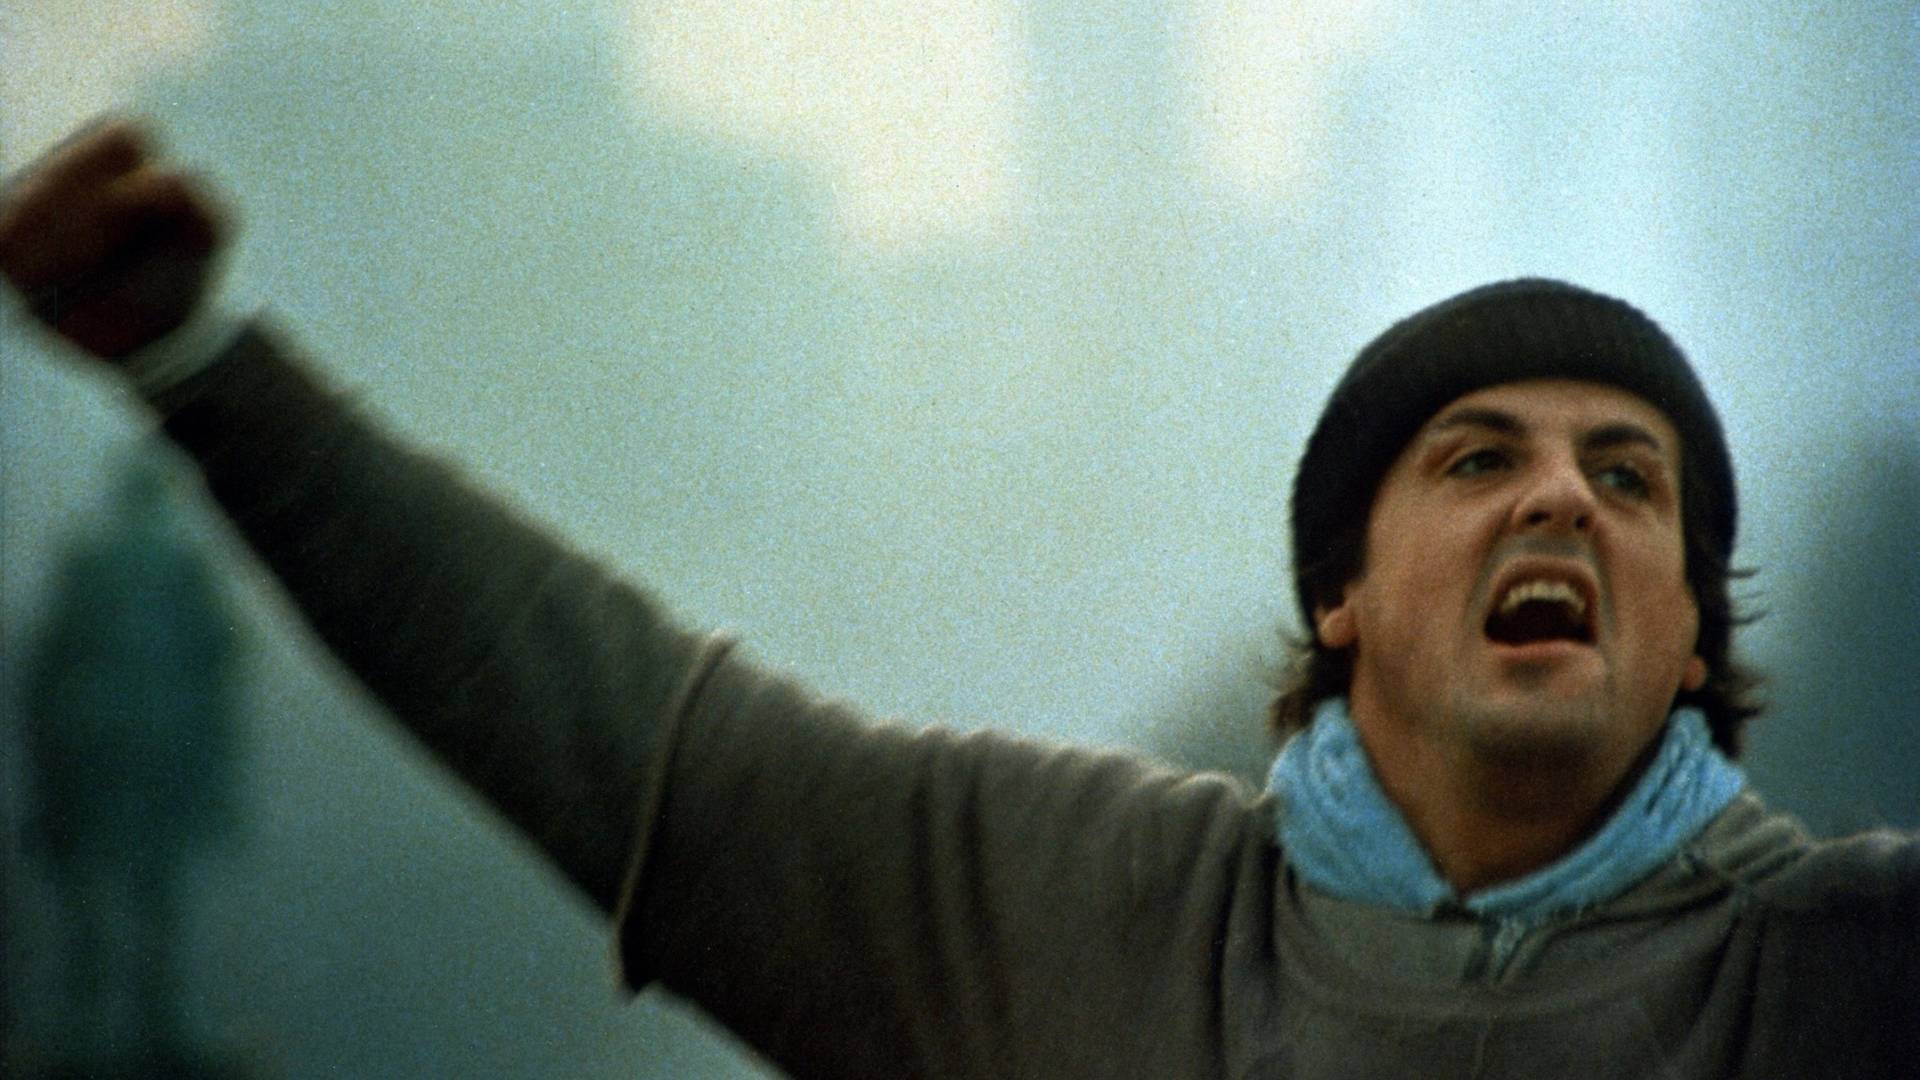 sylvester stallone in rocky wearing a hoodie and looking happy